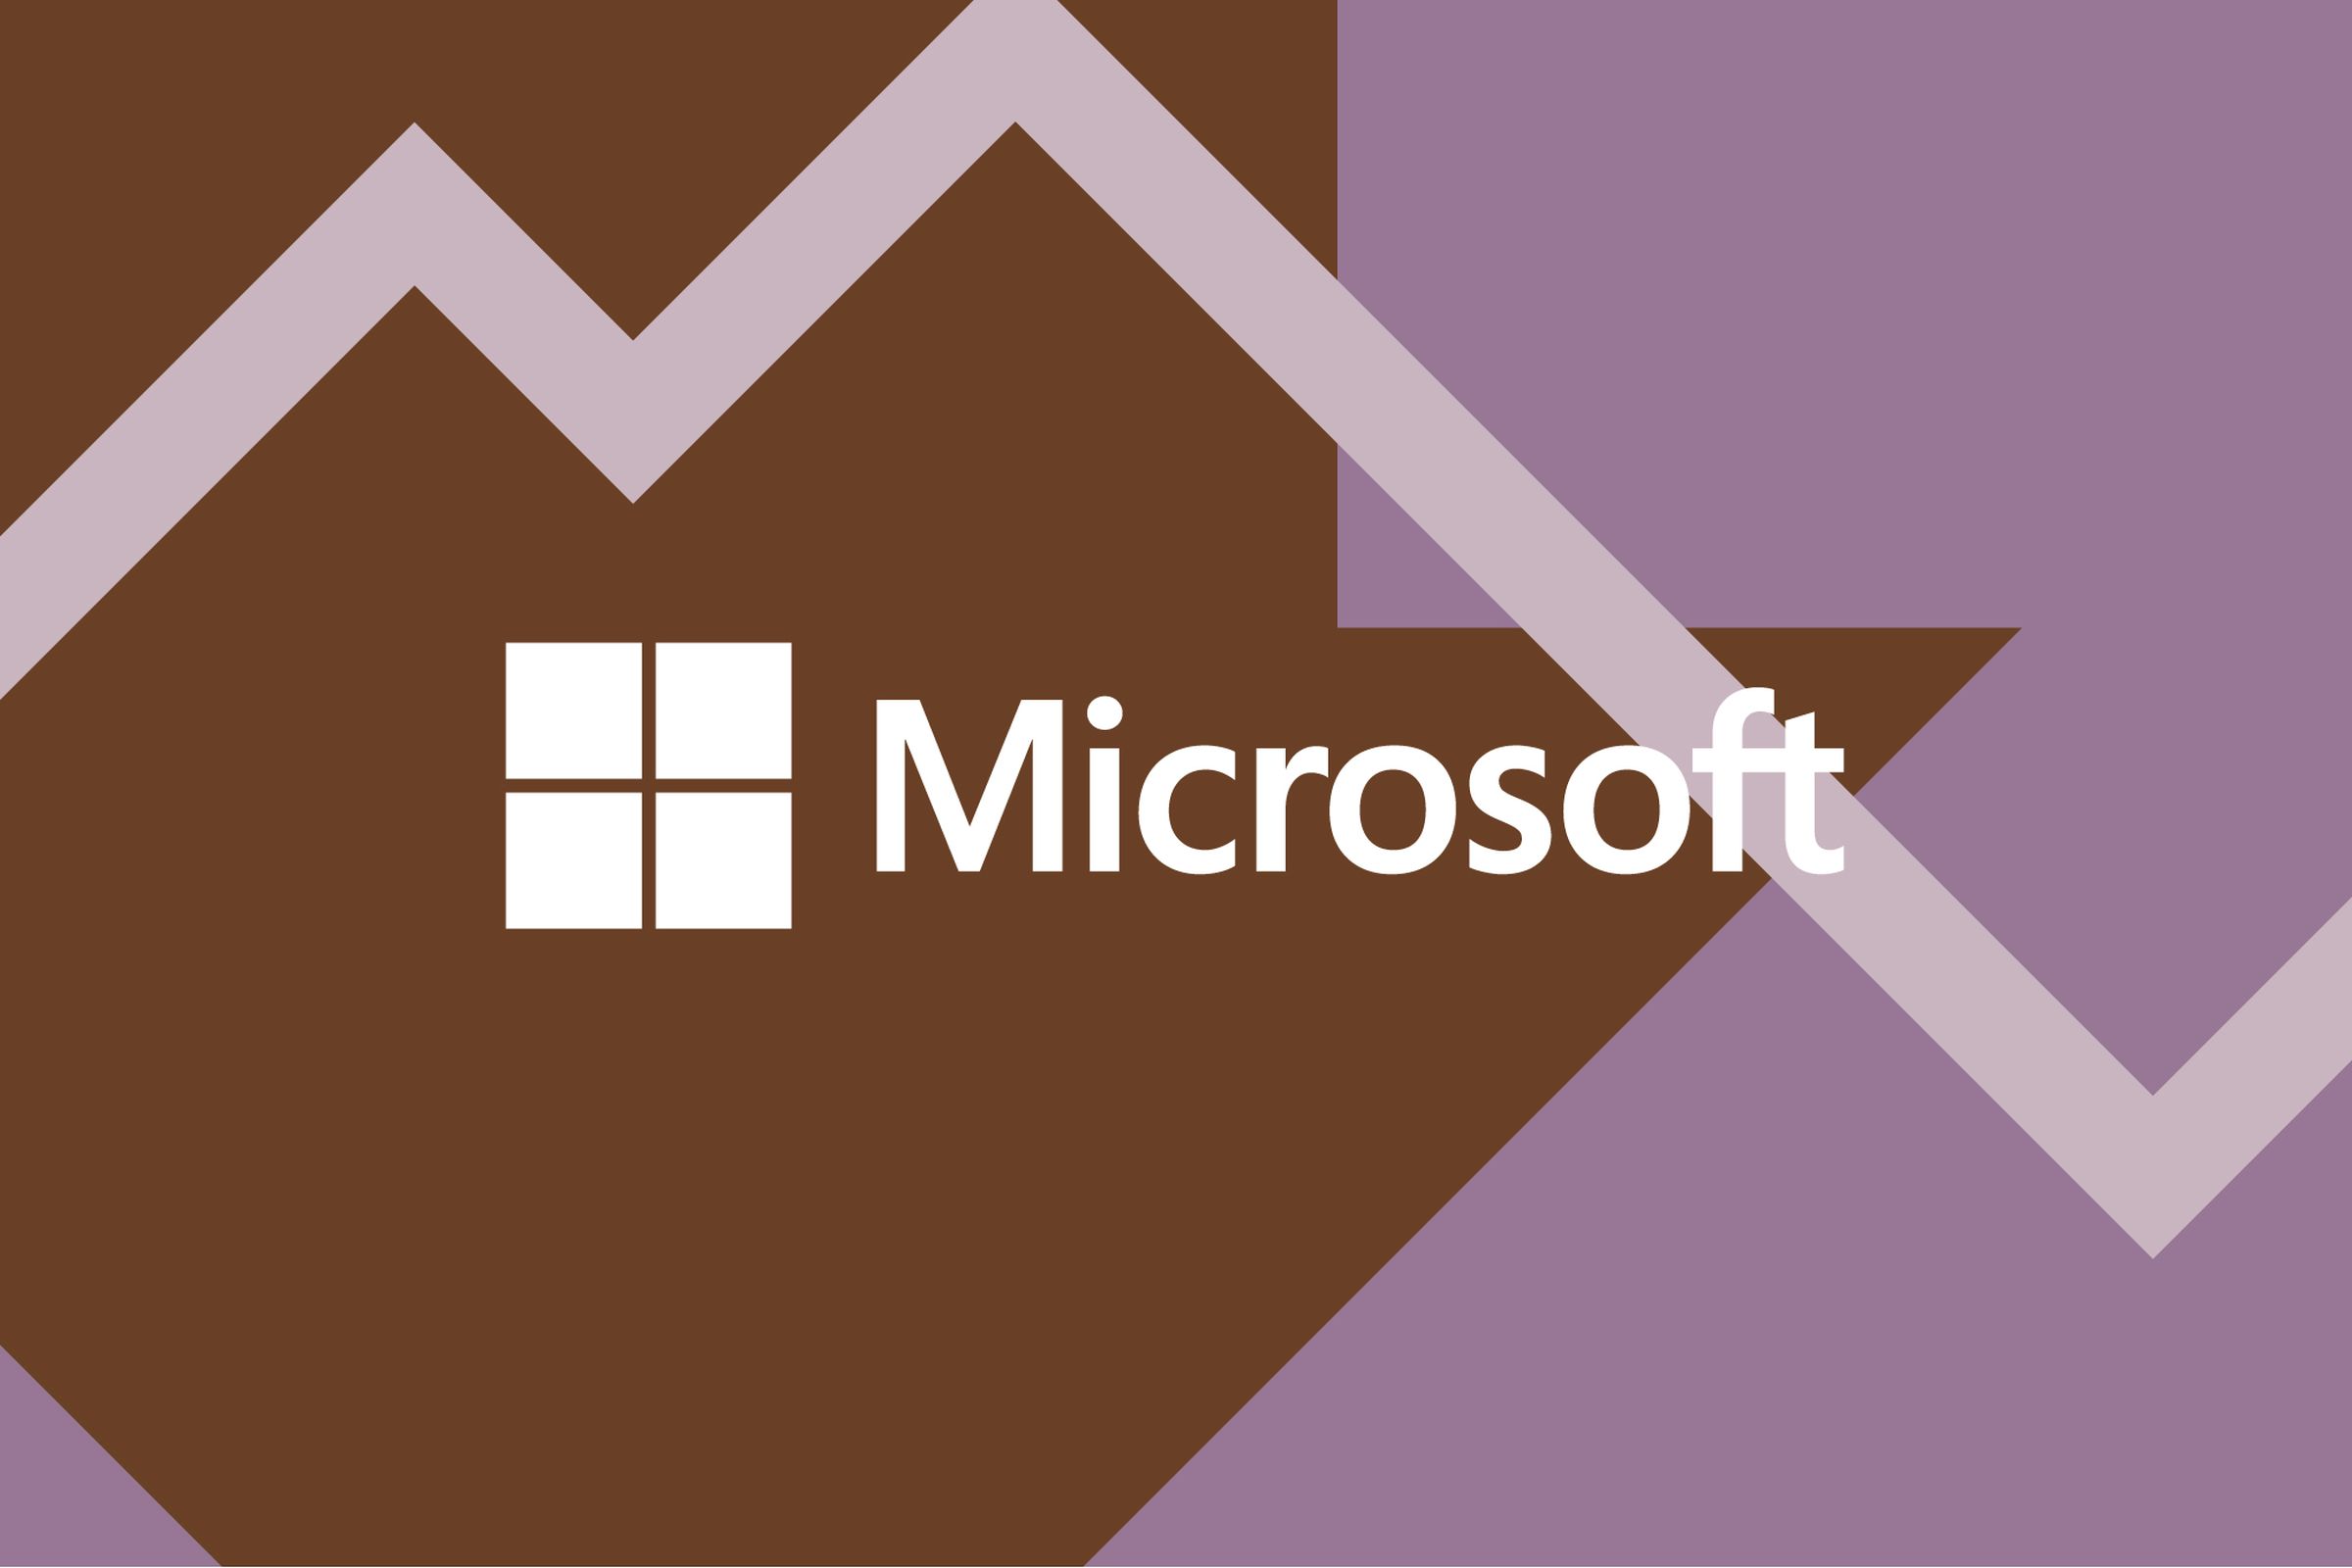 Vector collage of the Microsoft logo among arrows and lines going up and down.